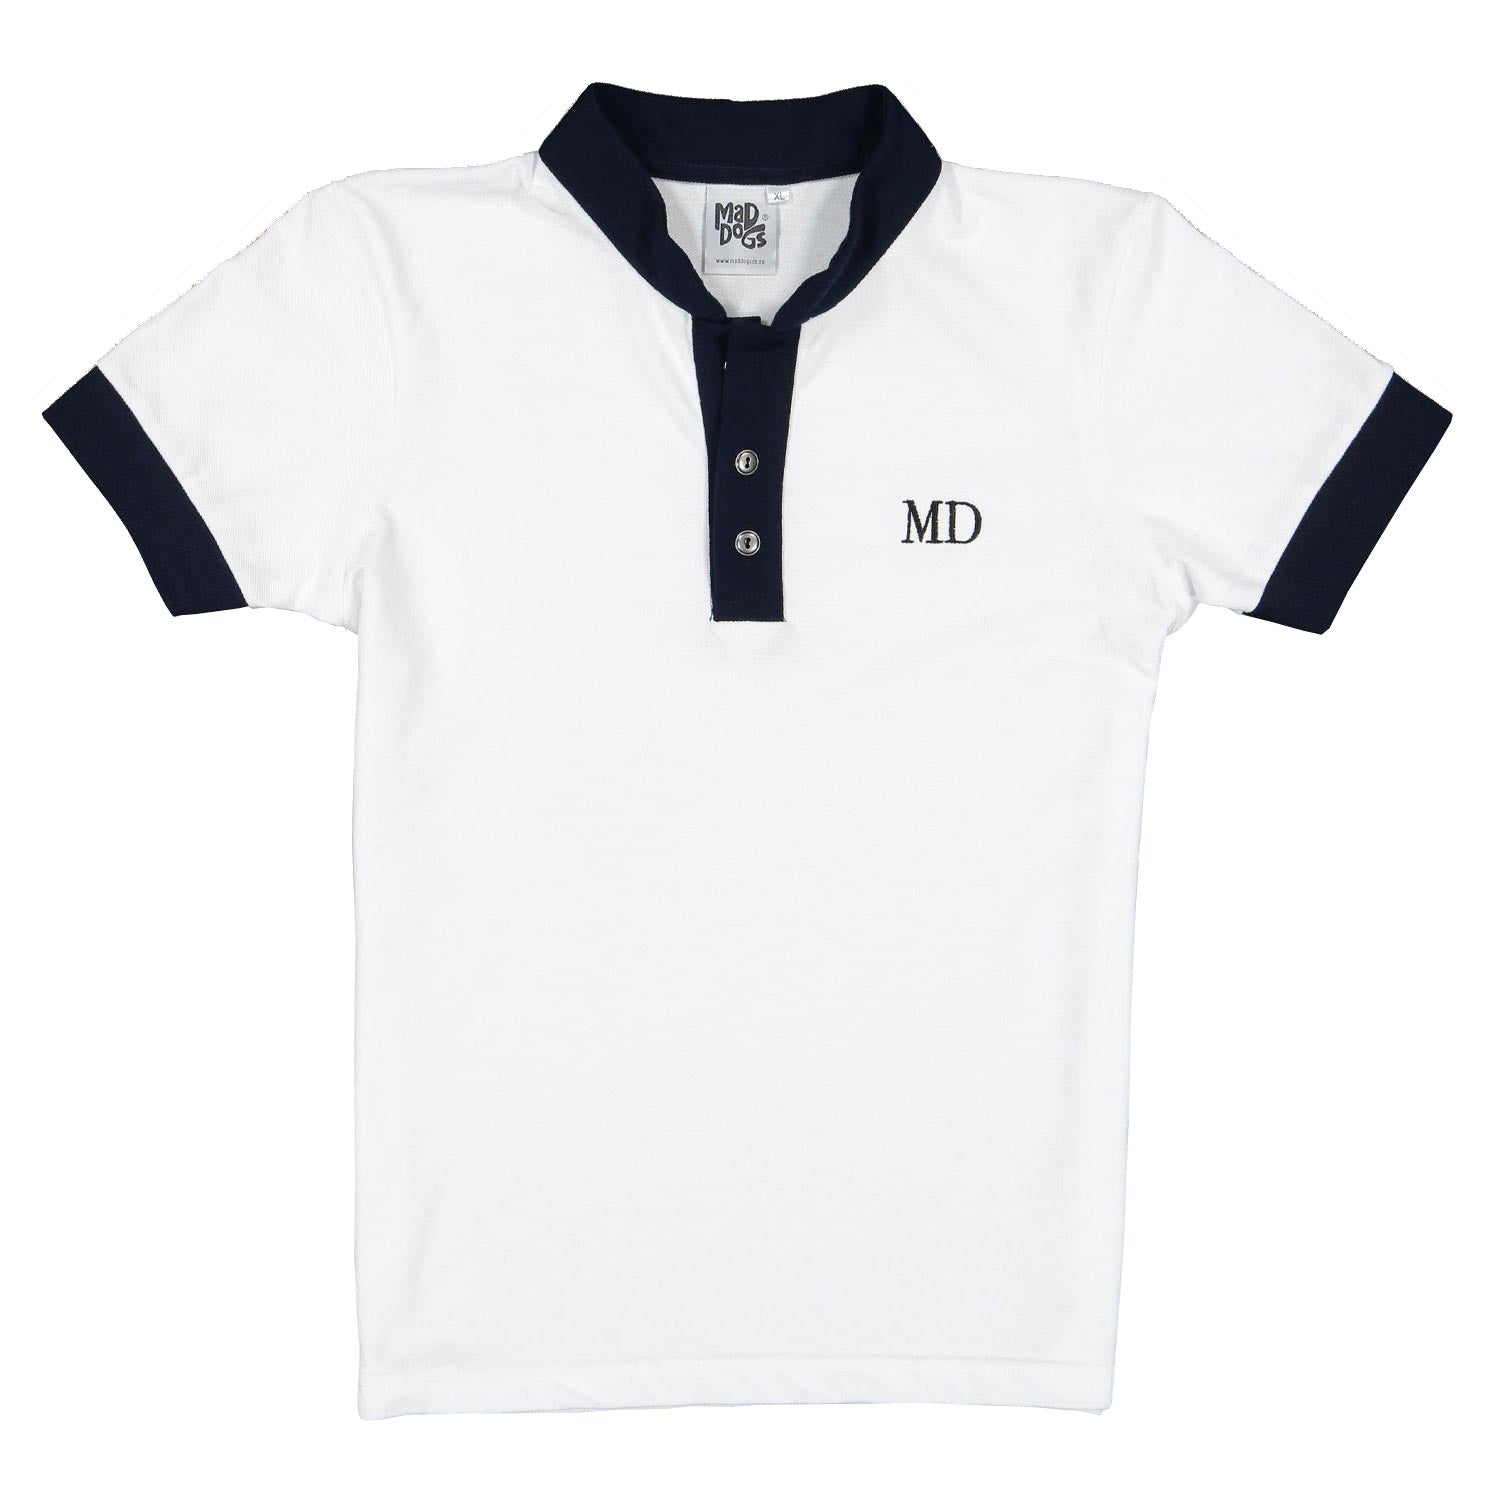 Mad Dogs White & Navy Elite Girls Polo Shirt Kids Tops Mad Dogs 